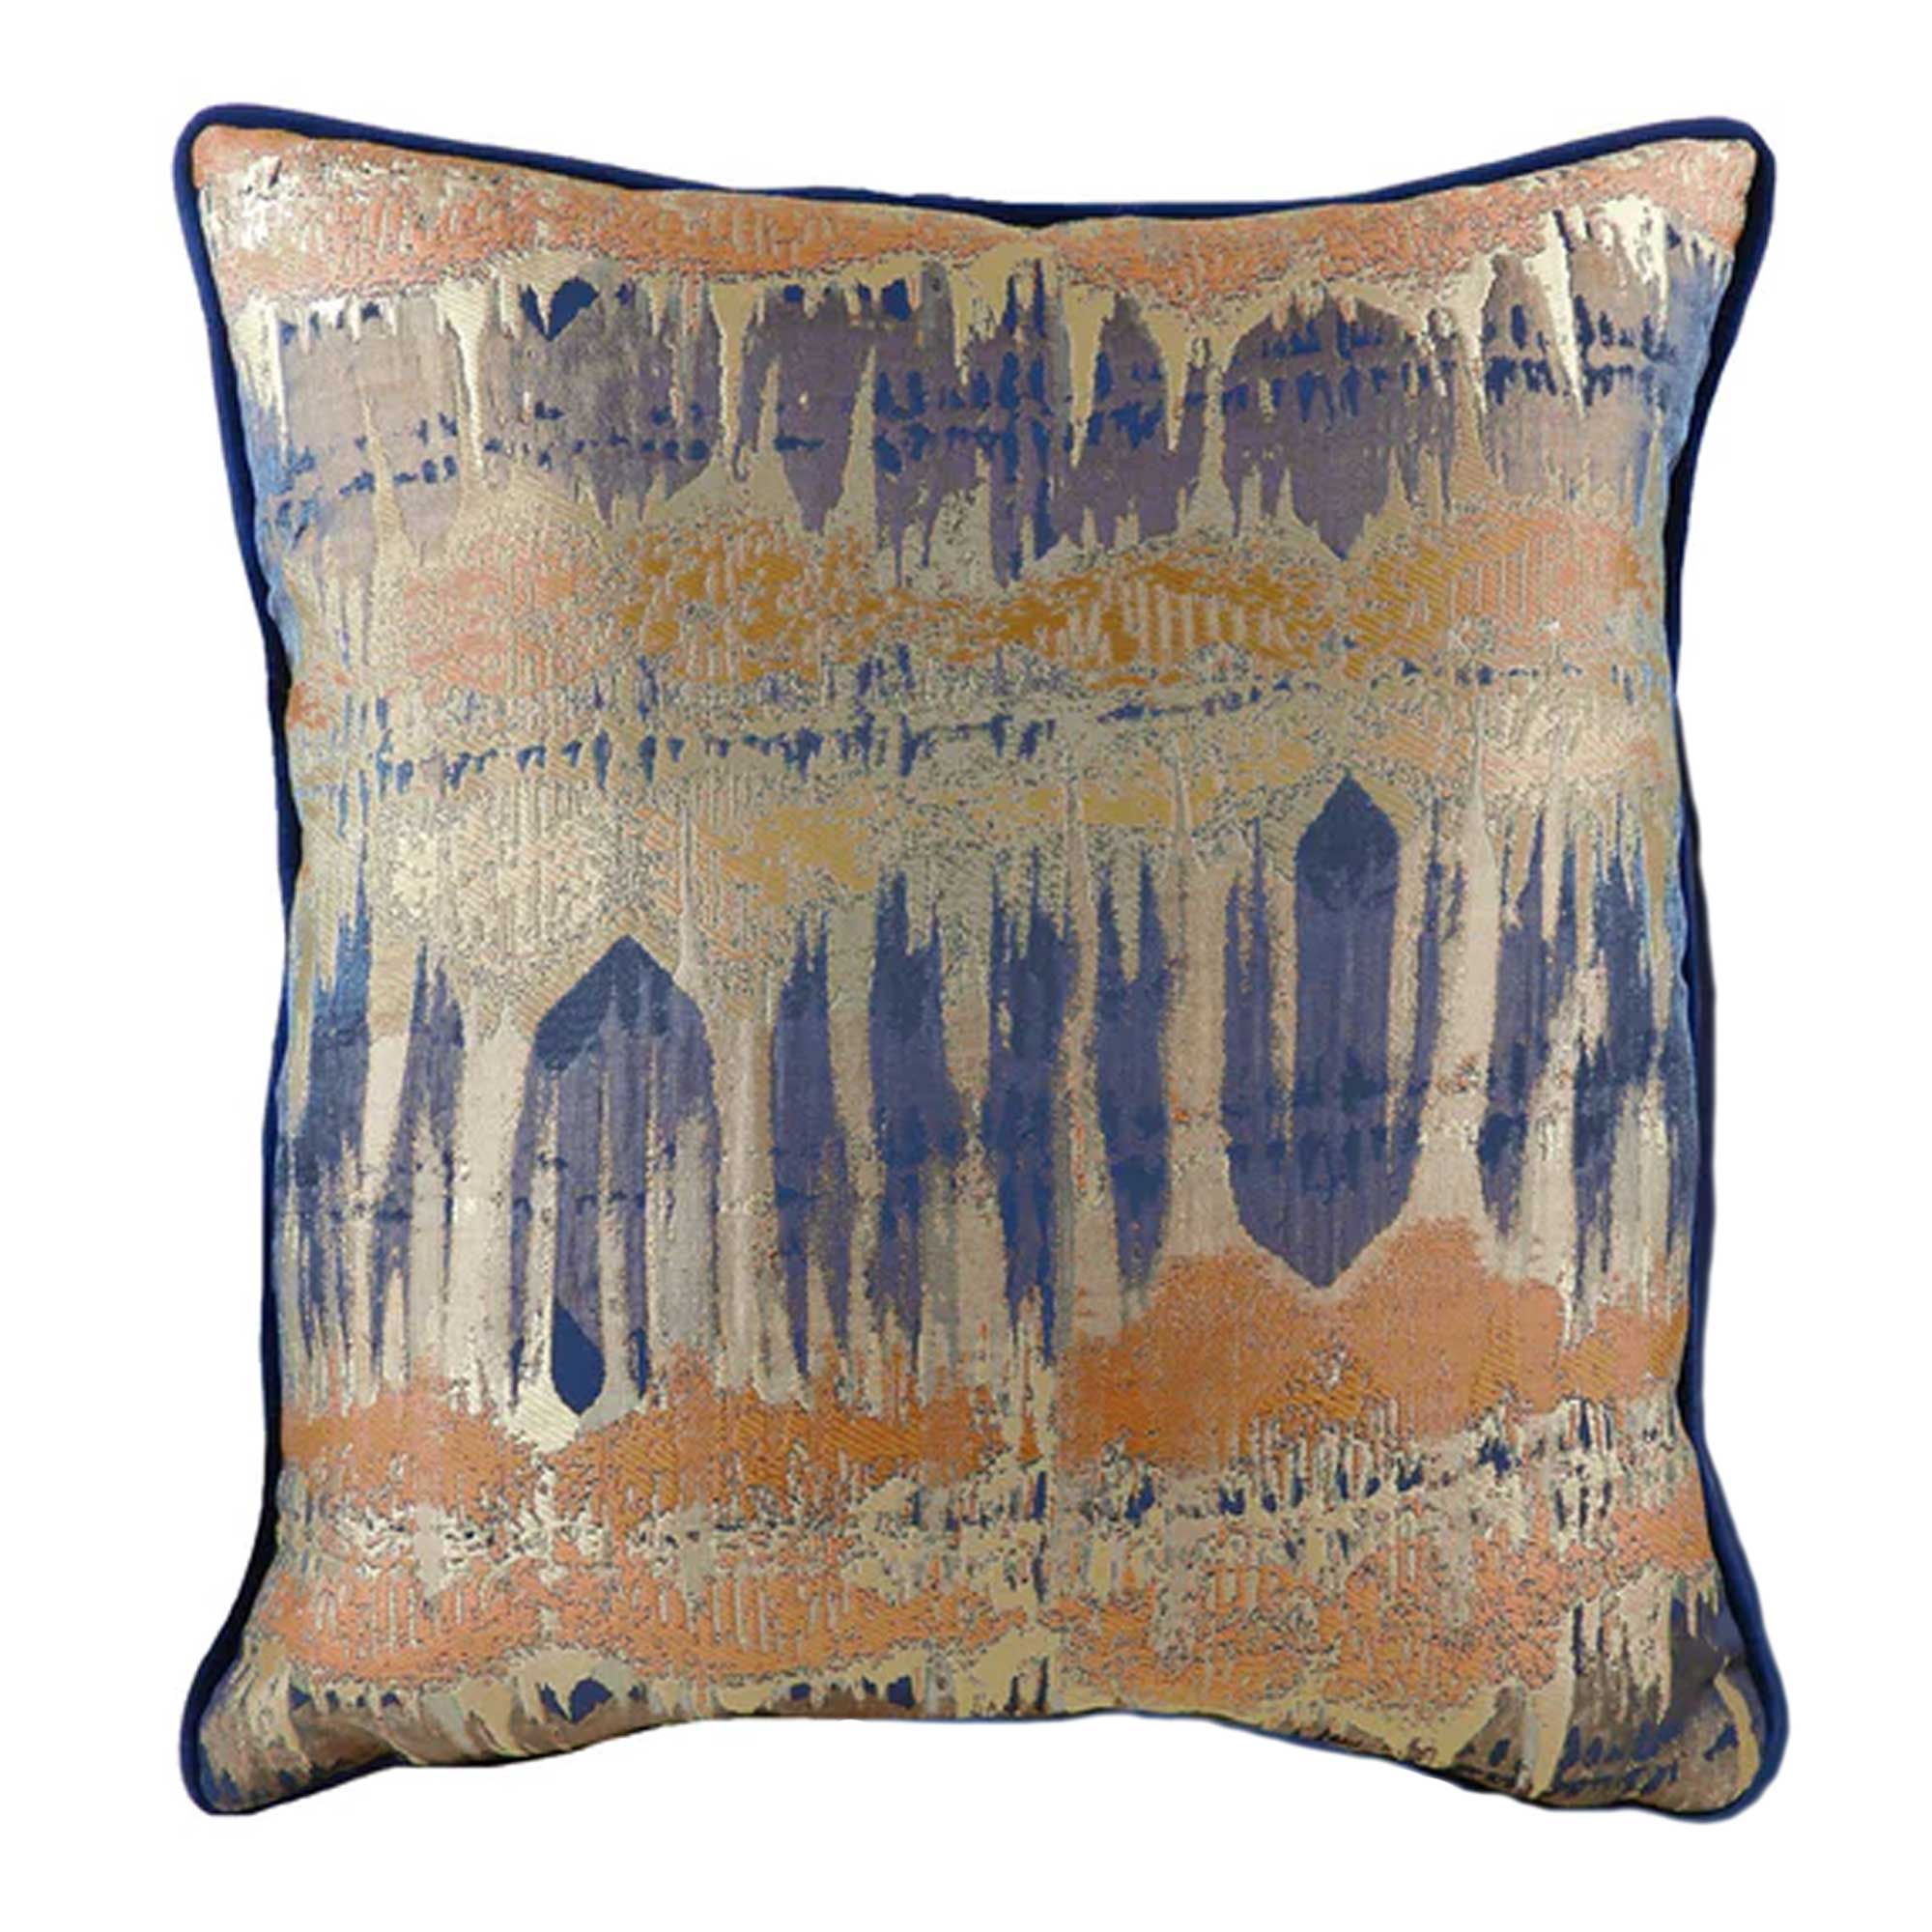 Marbled Blue Cushion, Square Polyester | Barker & Stonehouse